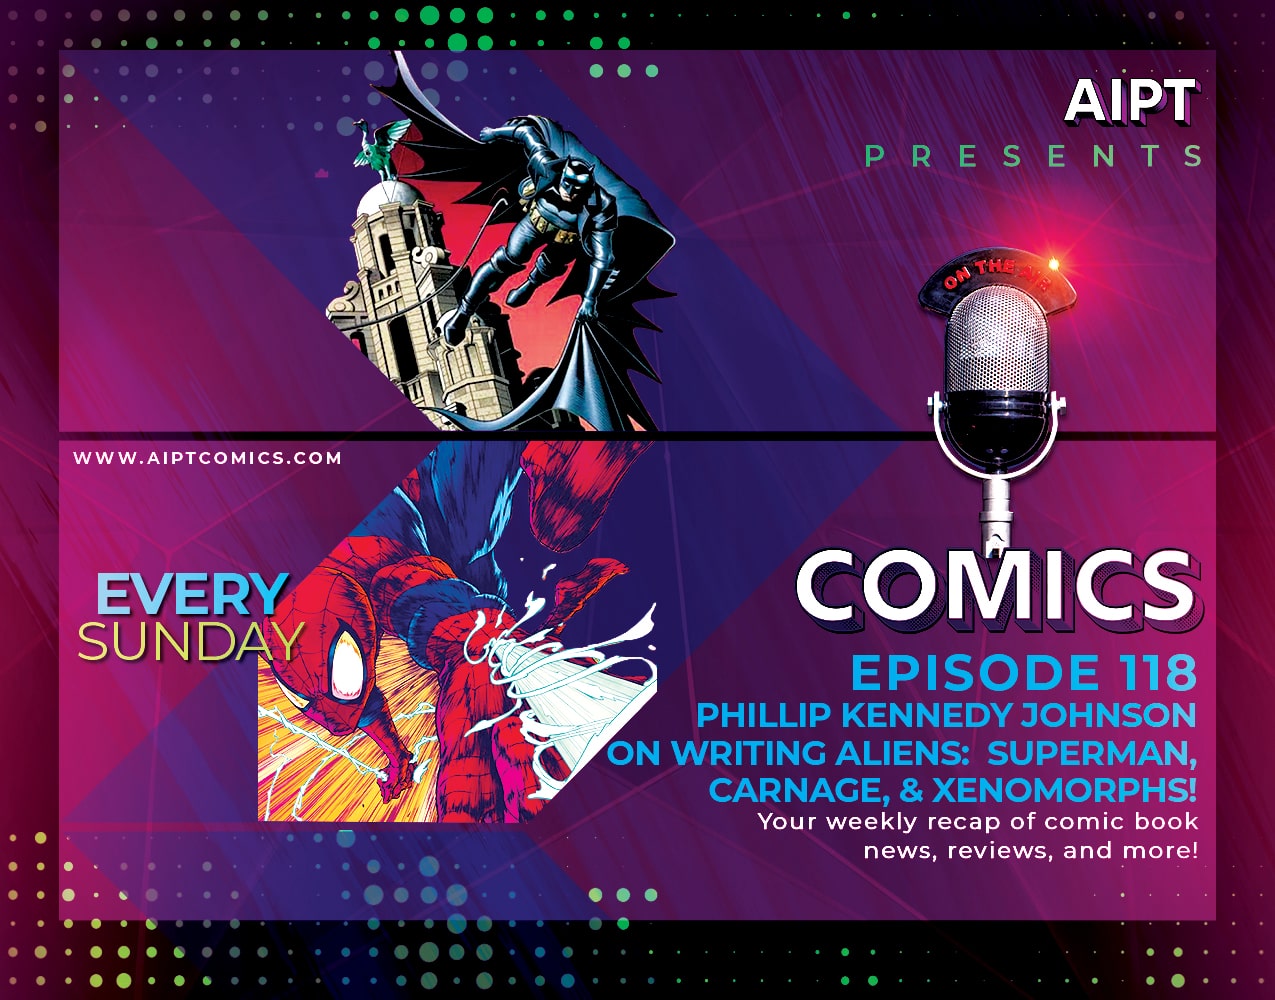 AIPT Comics Podcast Episode 118: Phillip Kennedy Johnson on writing aliens: Superman, Carnage, & Xenomorphs!